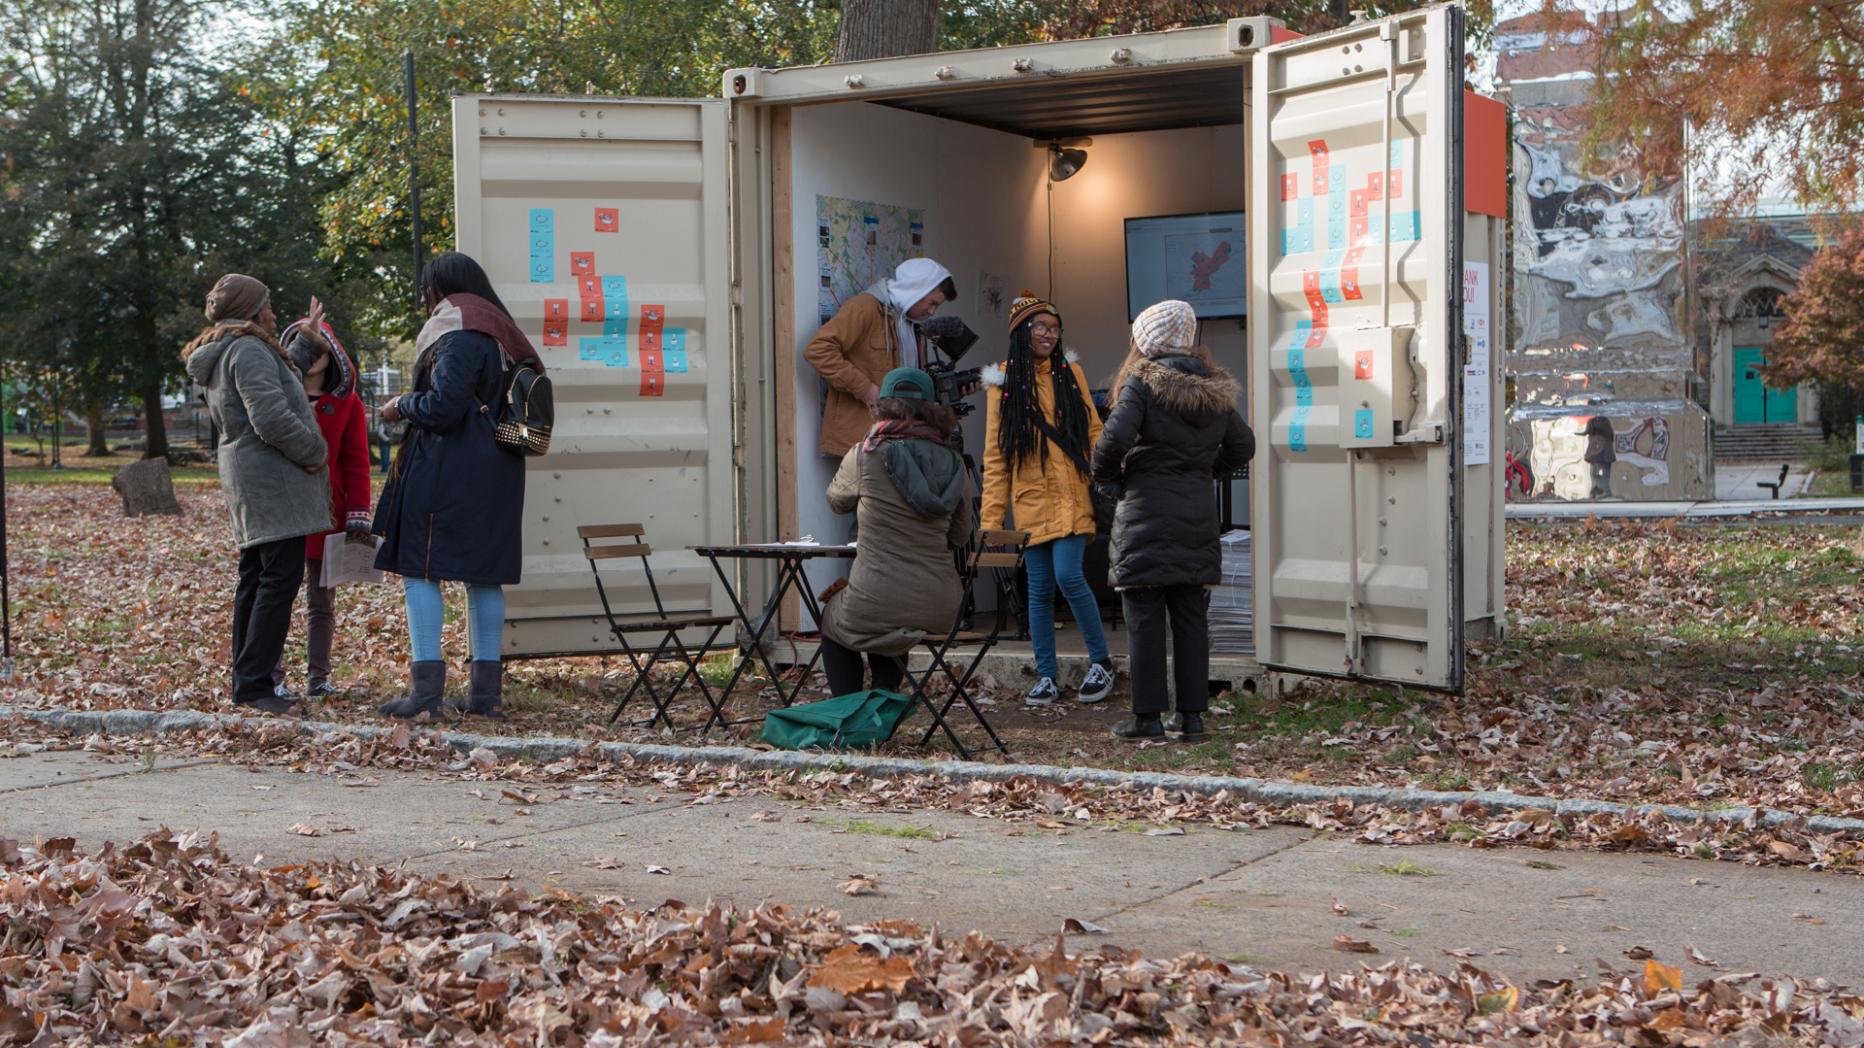 Students holding an information booth in a small cargo container during fall